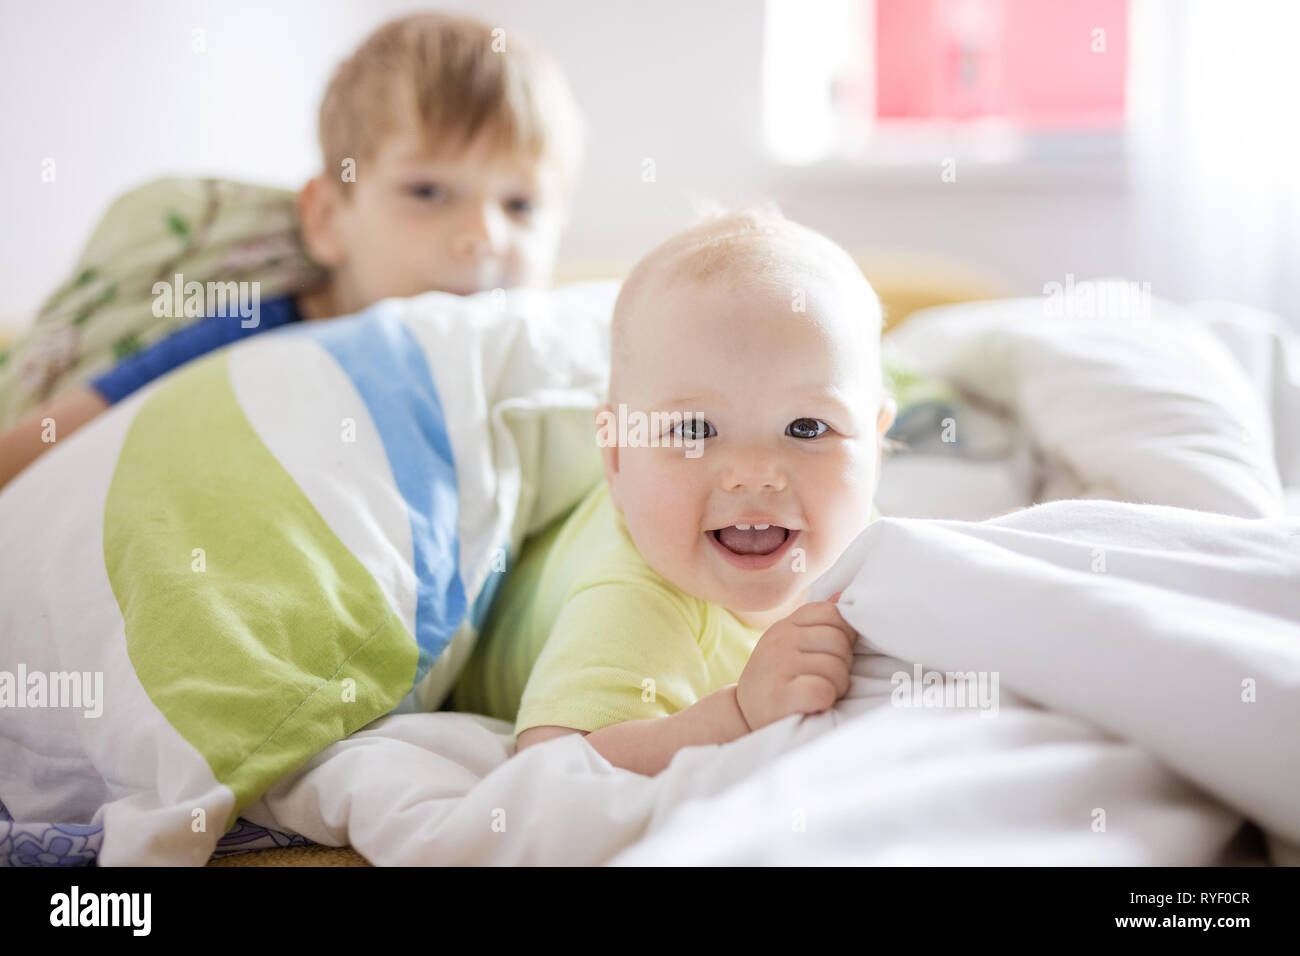 Siblings playing on bed at home. Baby girl and older brother having fun together. Stock Photo